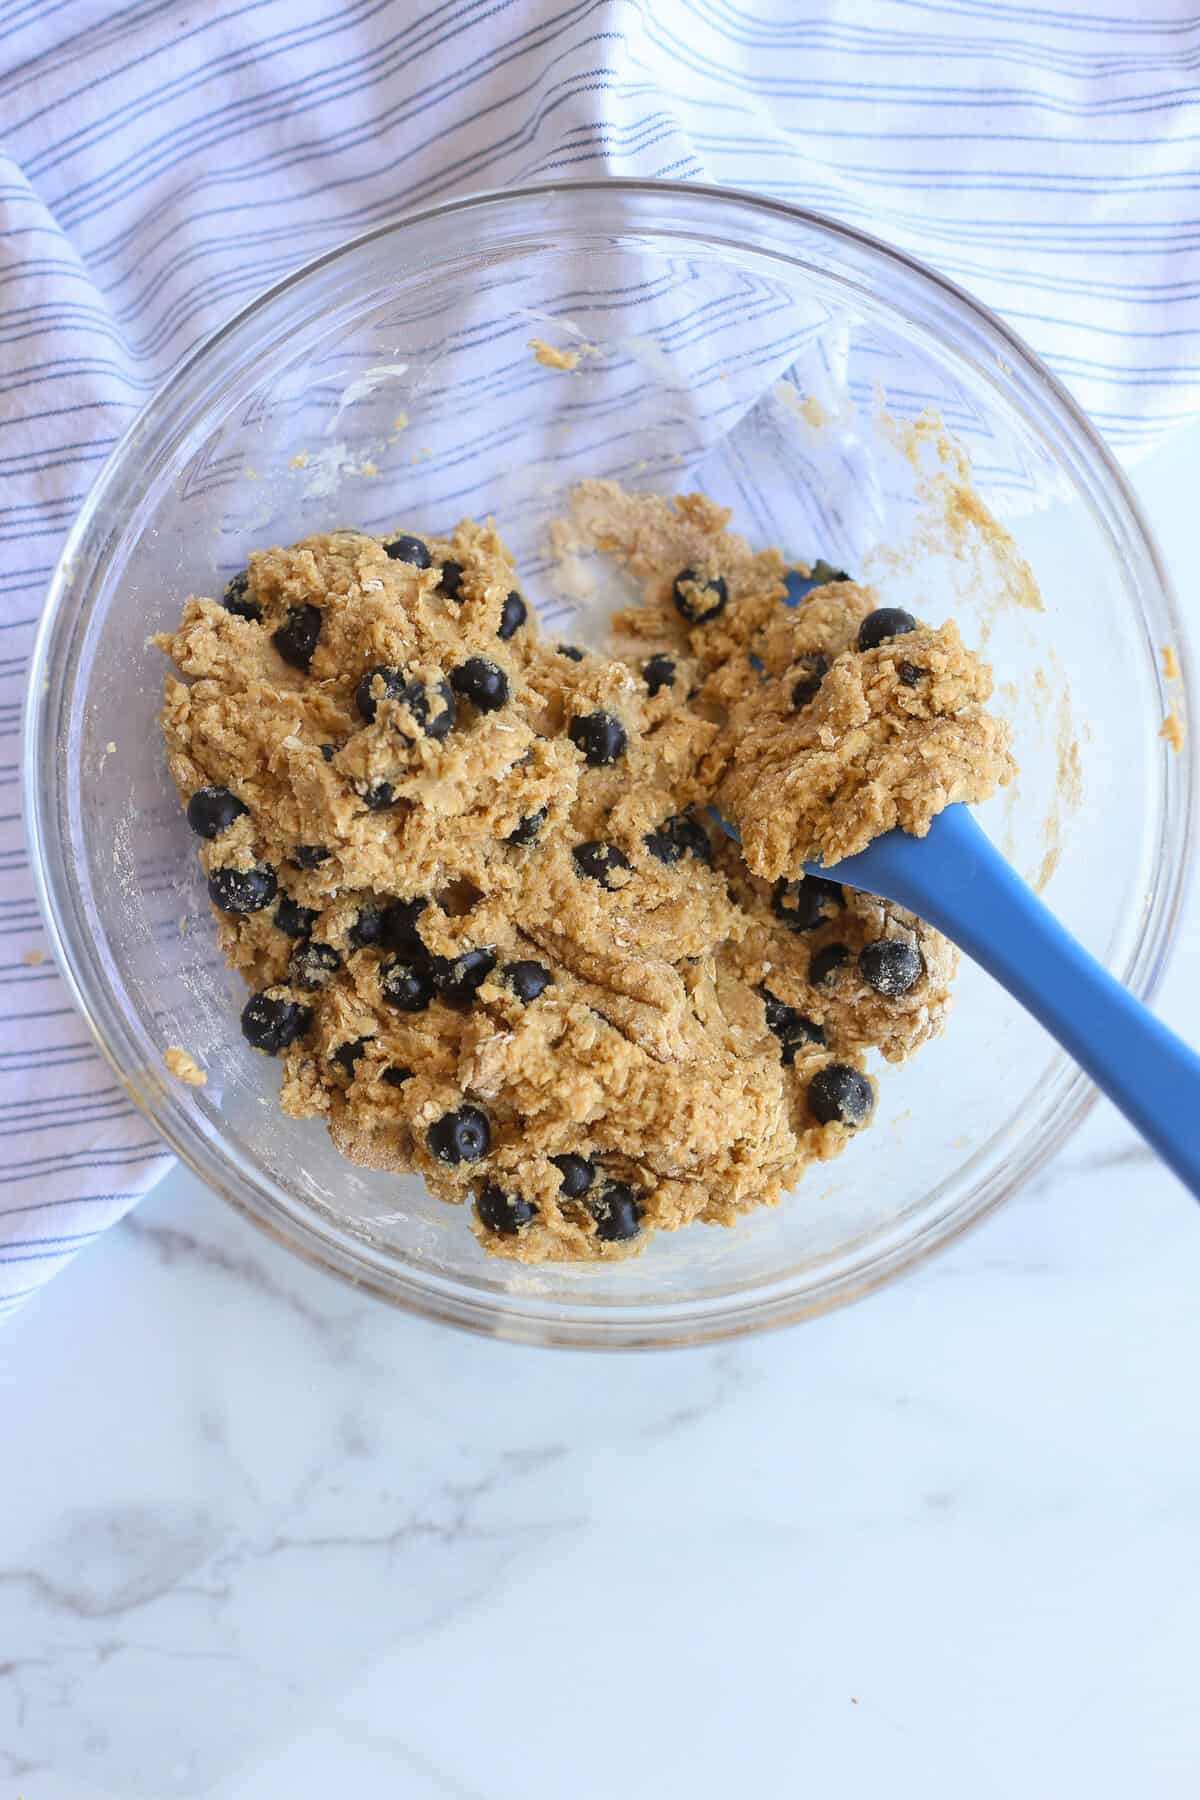 Batter for blueberry oatmeal muffins